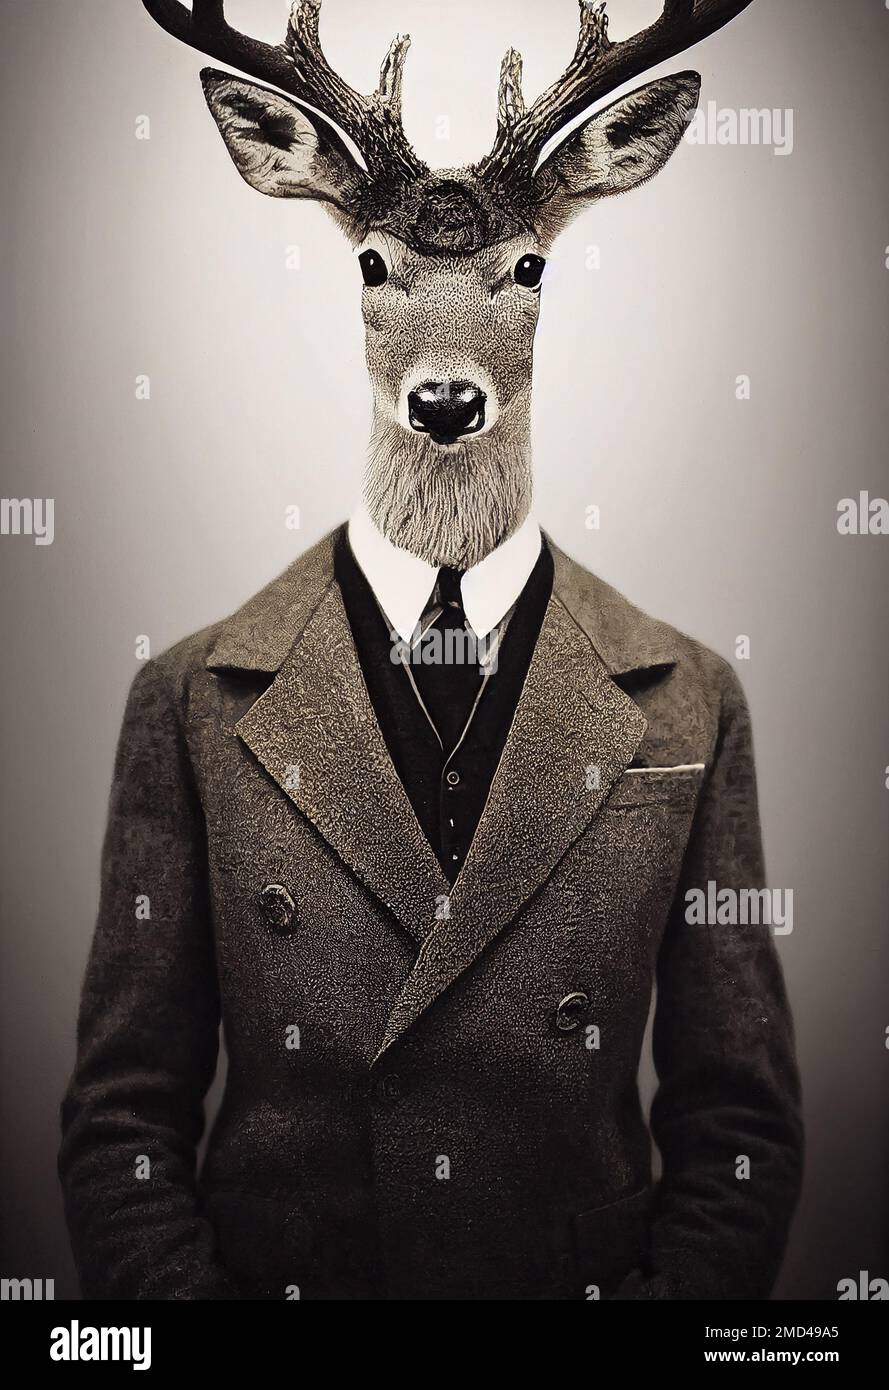 Deer with a suit Stock Photo